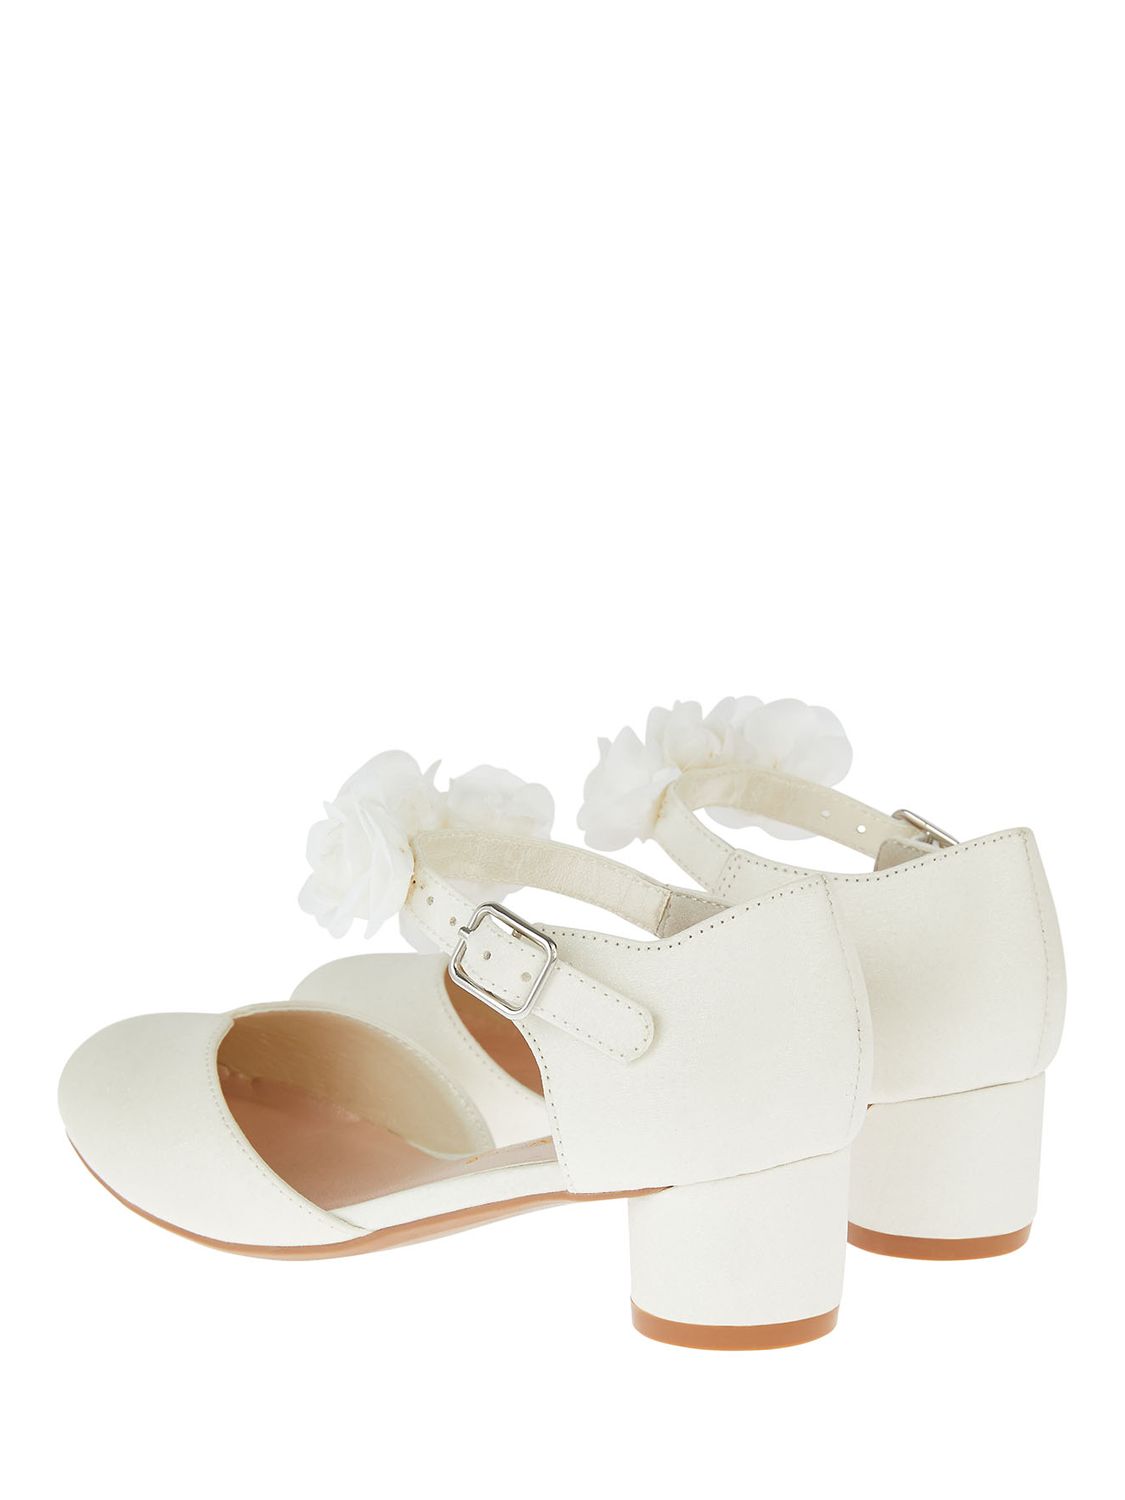 Monsoon Kids' Corsage Two Part Heels, Ivory, A4